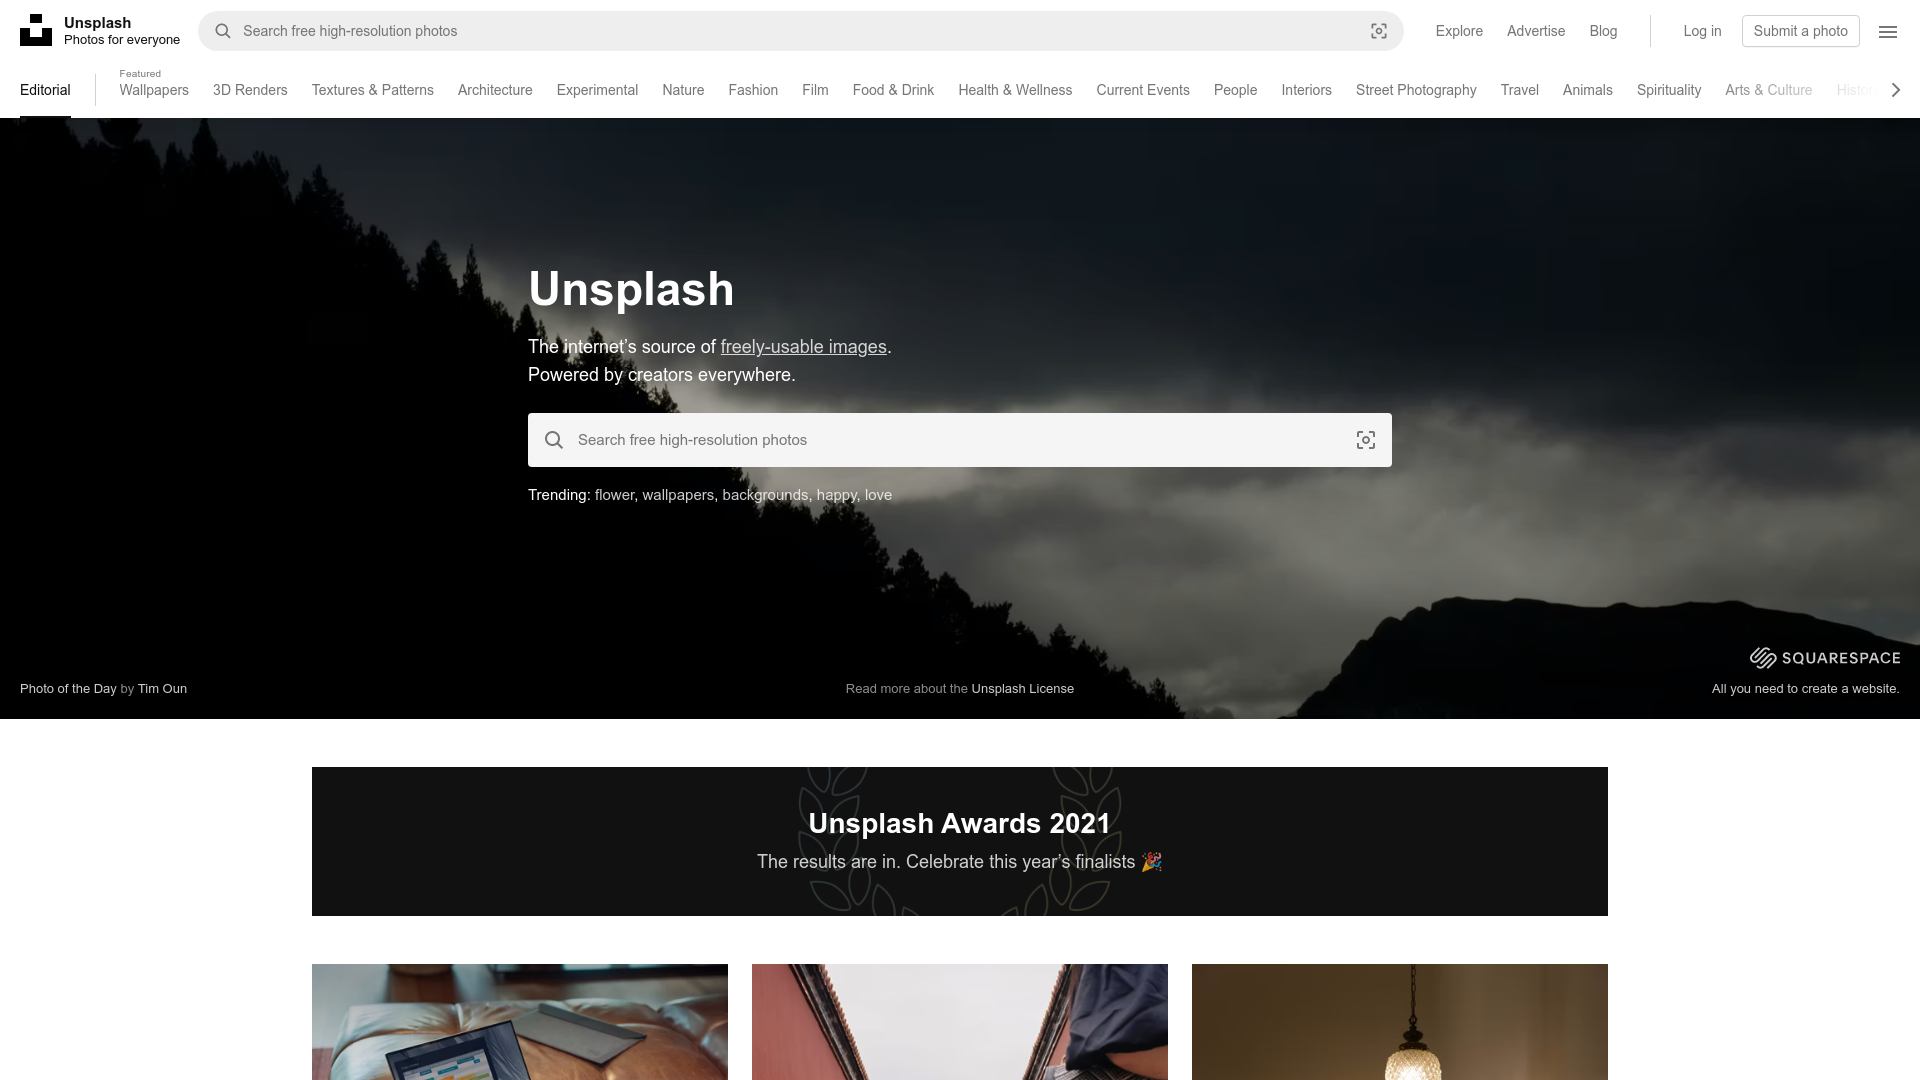 Unsplash is a website dedicated to sharing stock photography under the Unsplash license. Since 2021, it has been owned by Getty Images. 